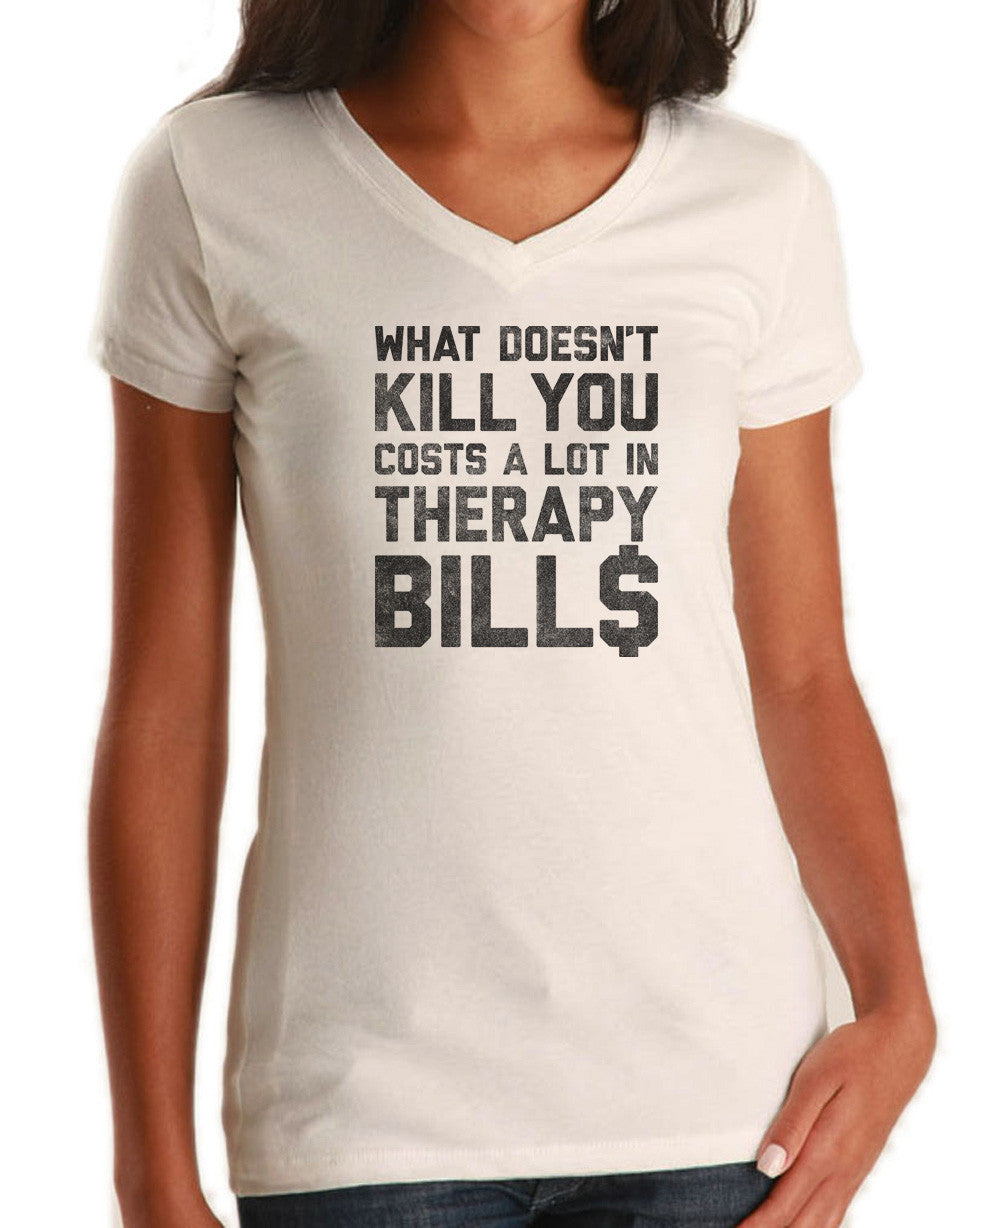 Women's What Doesn't Kill You Costs a Lot in Therapy Bills Vneck T-Shirt